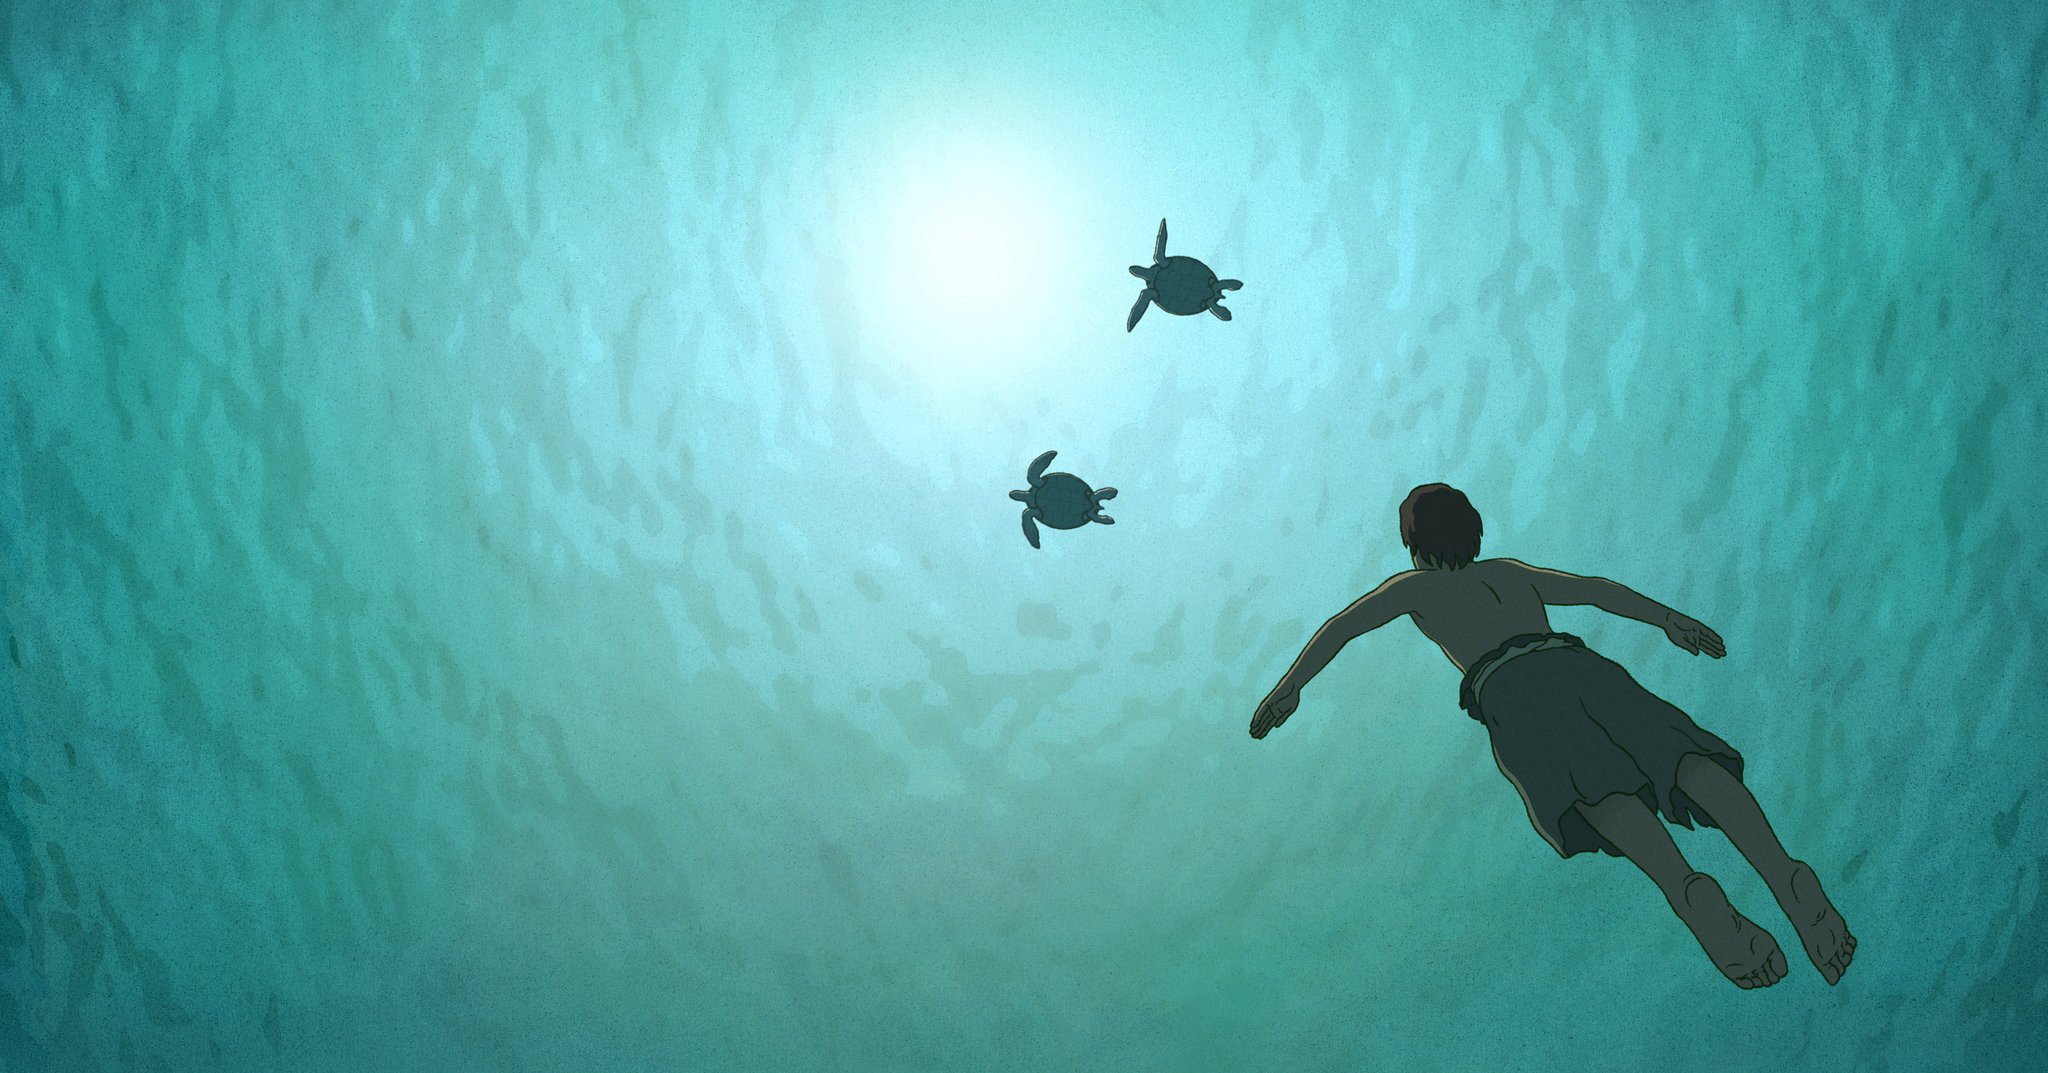 The Red Turtle (2017)